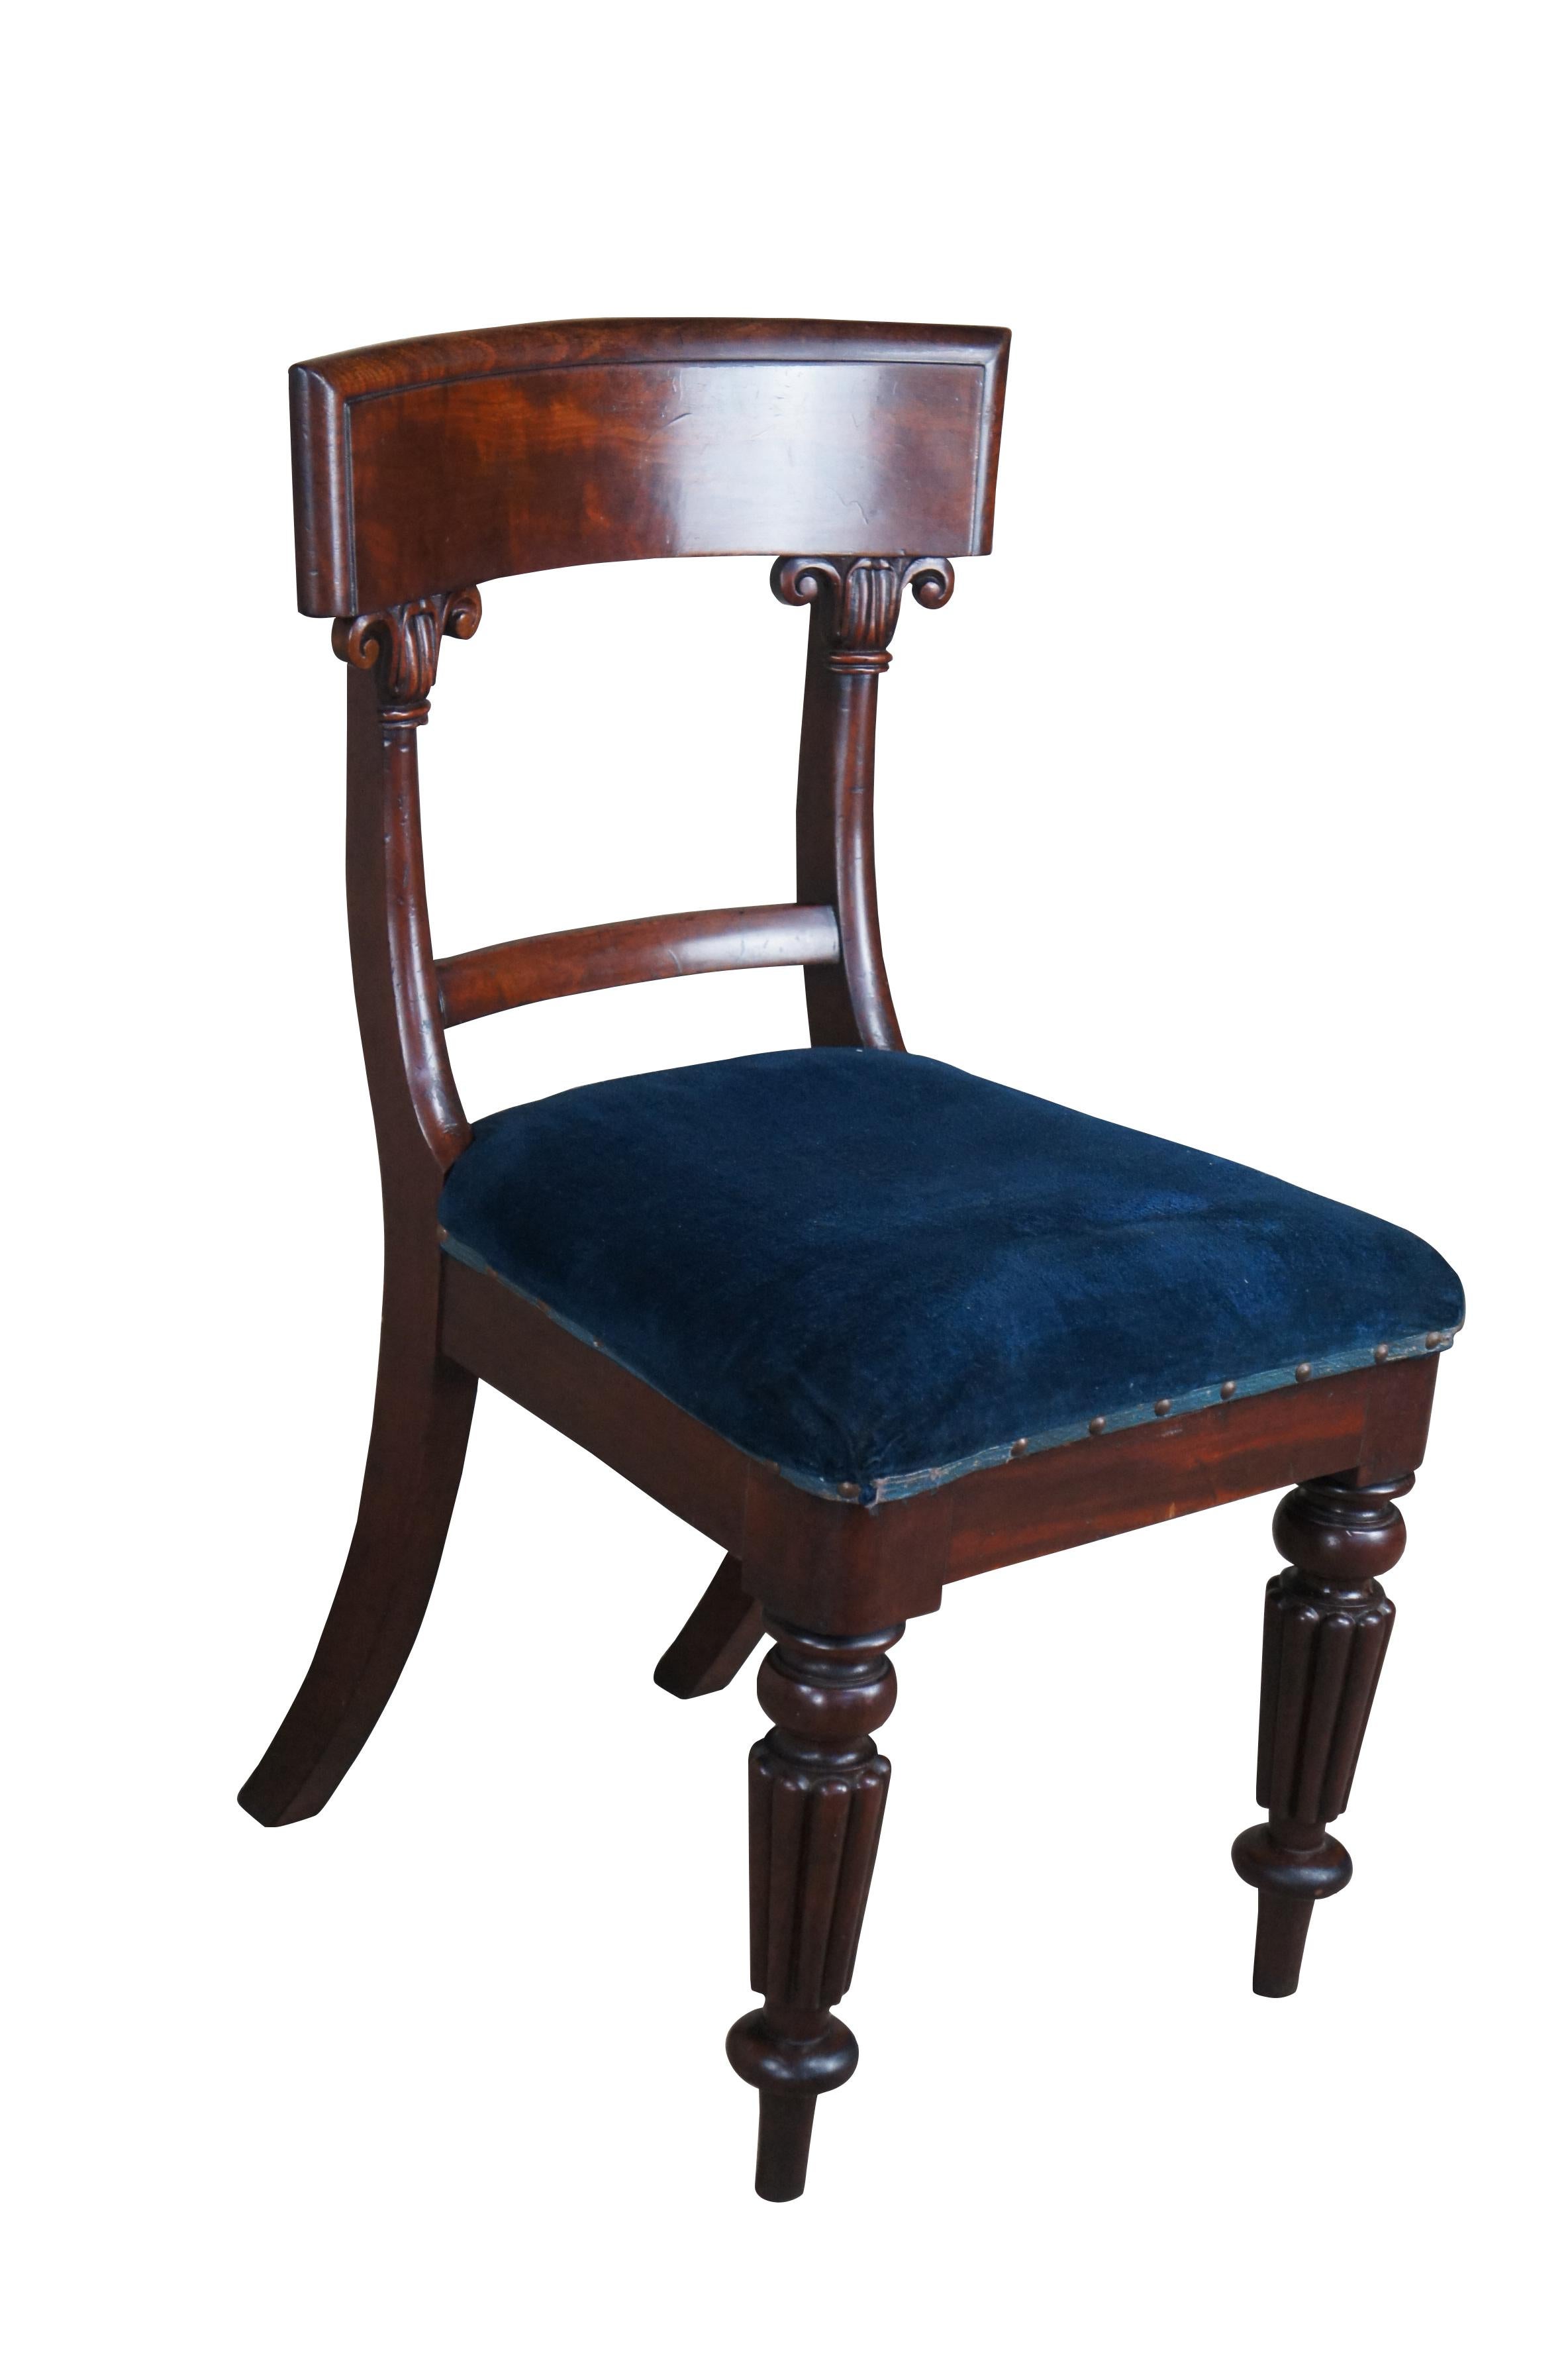 An exquisite English Regency chair from the first half of the 19th century.  Made from mahogany with a contoured crest rail, ornate embellishments and blue upholstered seat.  The chair is supported by Reeded legs with arrow feet along the front and